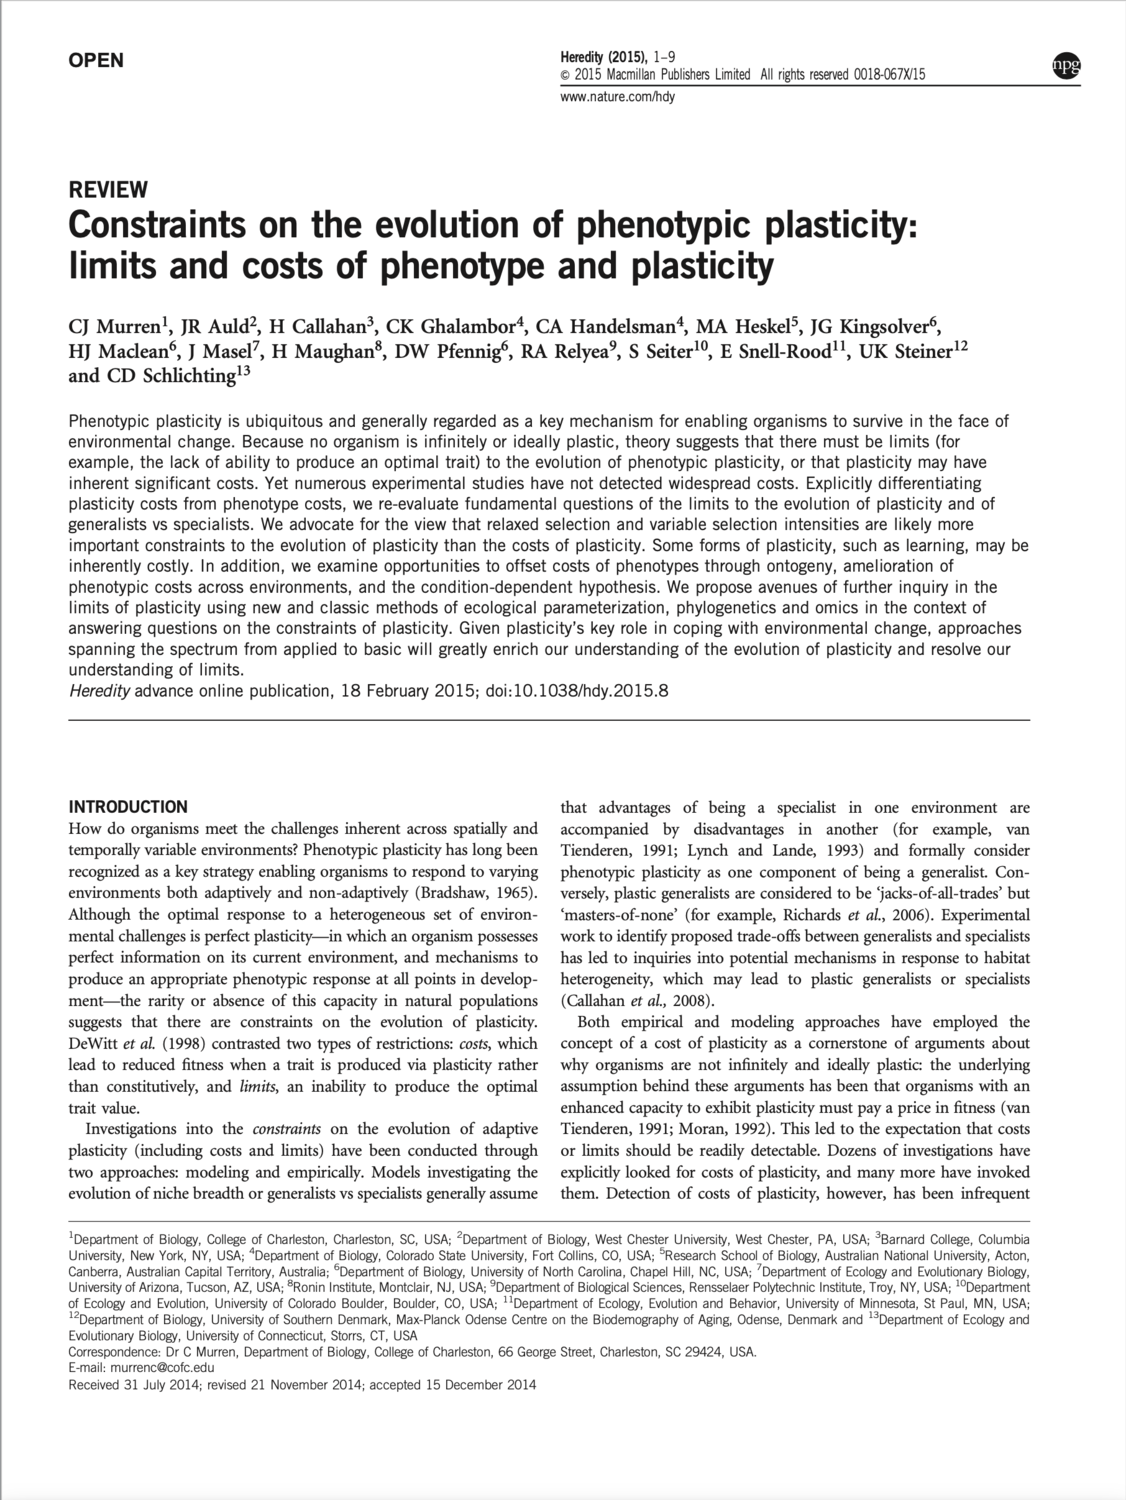 Constraints on the evolution of phenotypic plasticity limits and costs of phenotype and plasticity